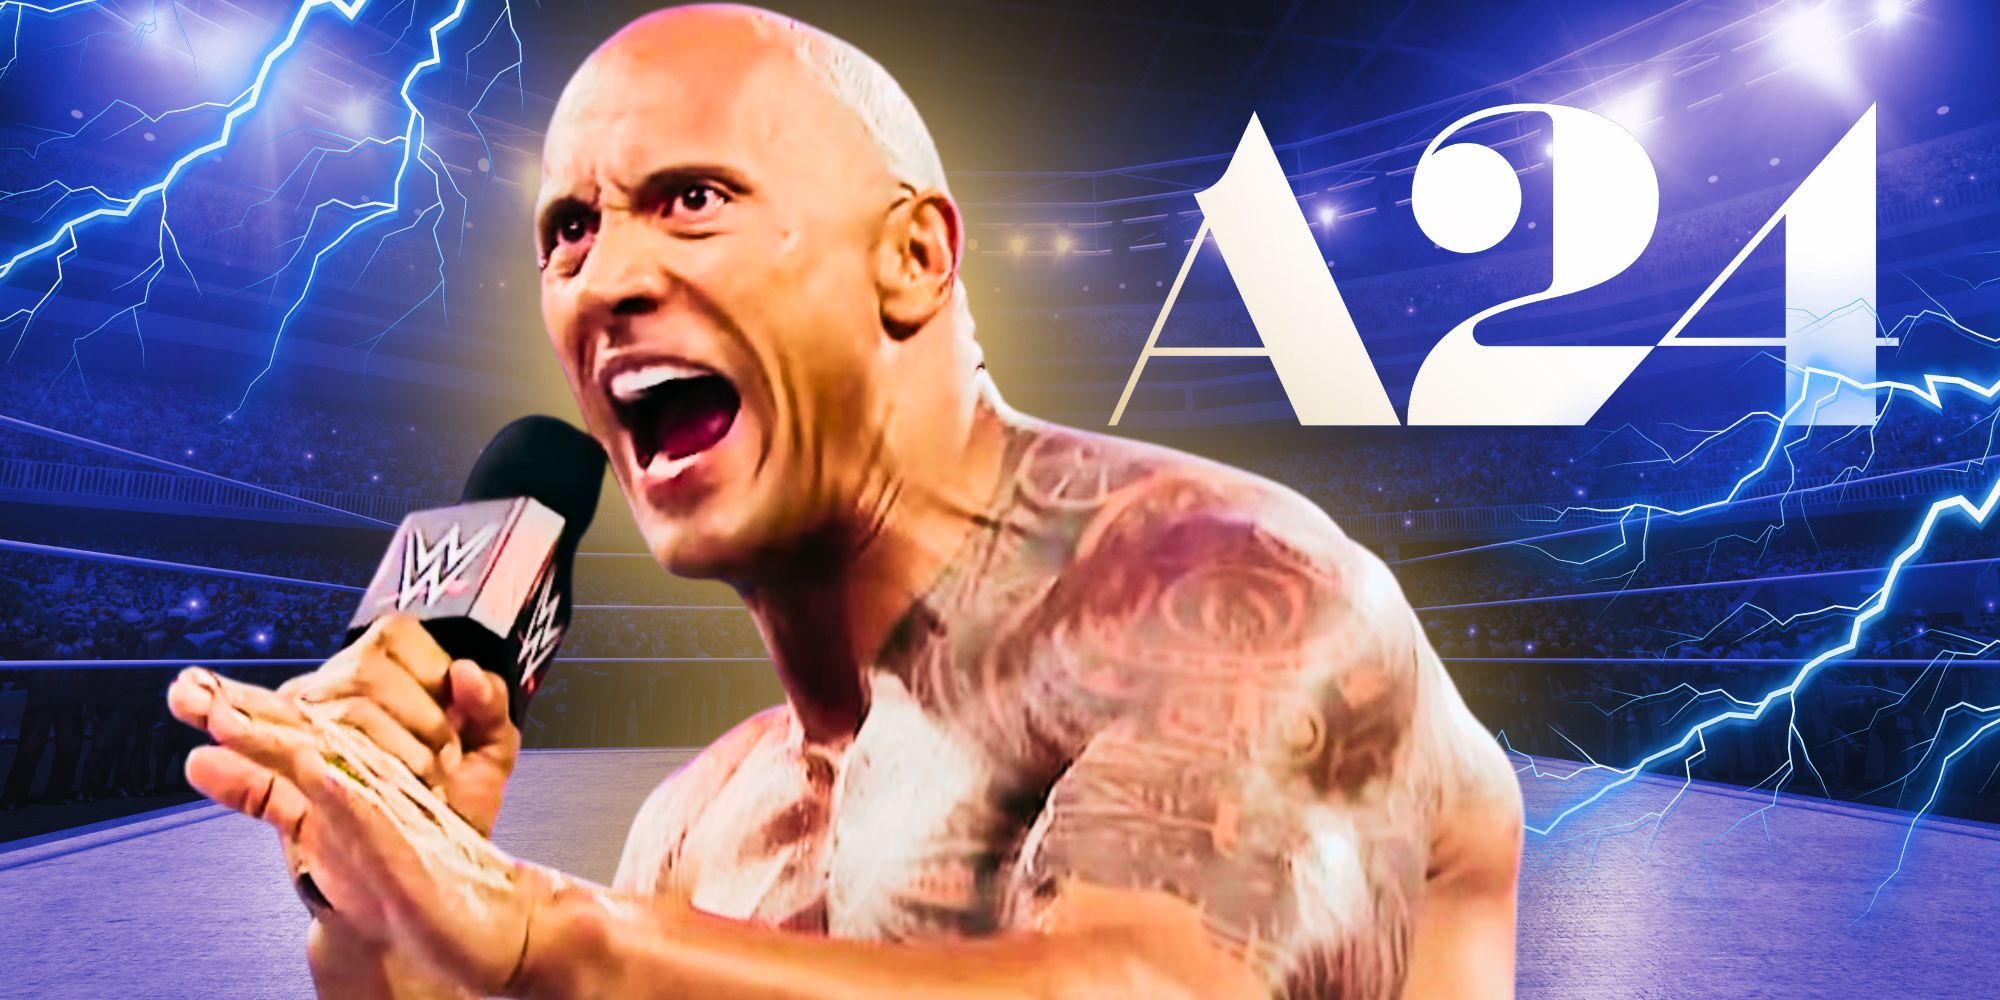 Dwayne Johnson in WWE and the A24 Logo The Smashing Machine